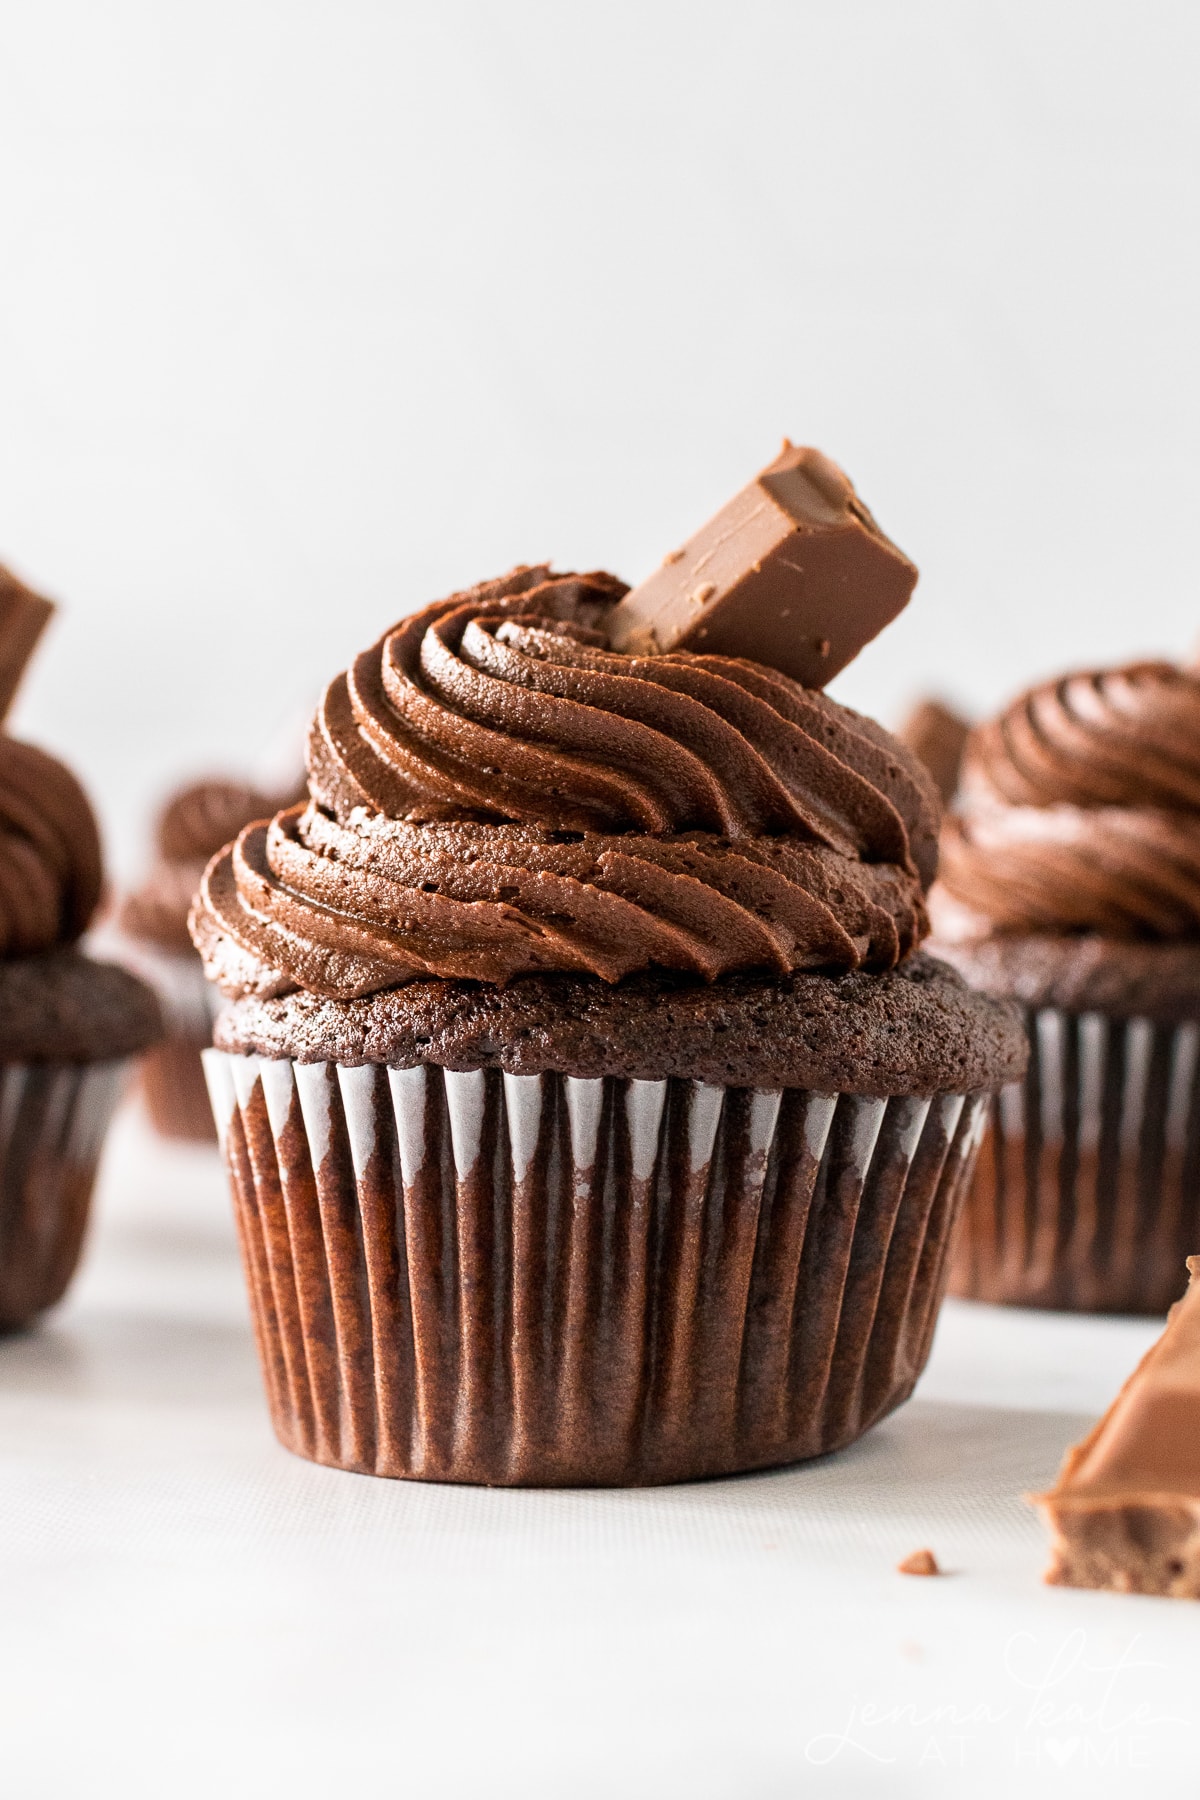 close up of a chocolate cupcake with chocolate buttercream frosting